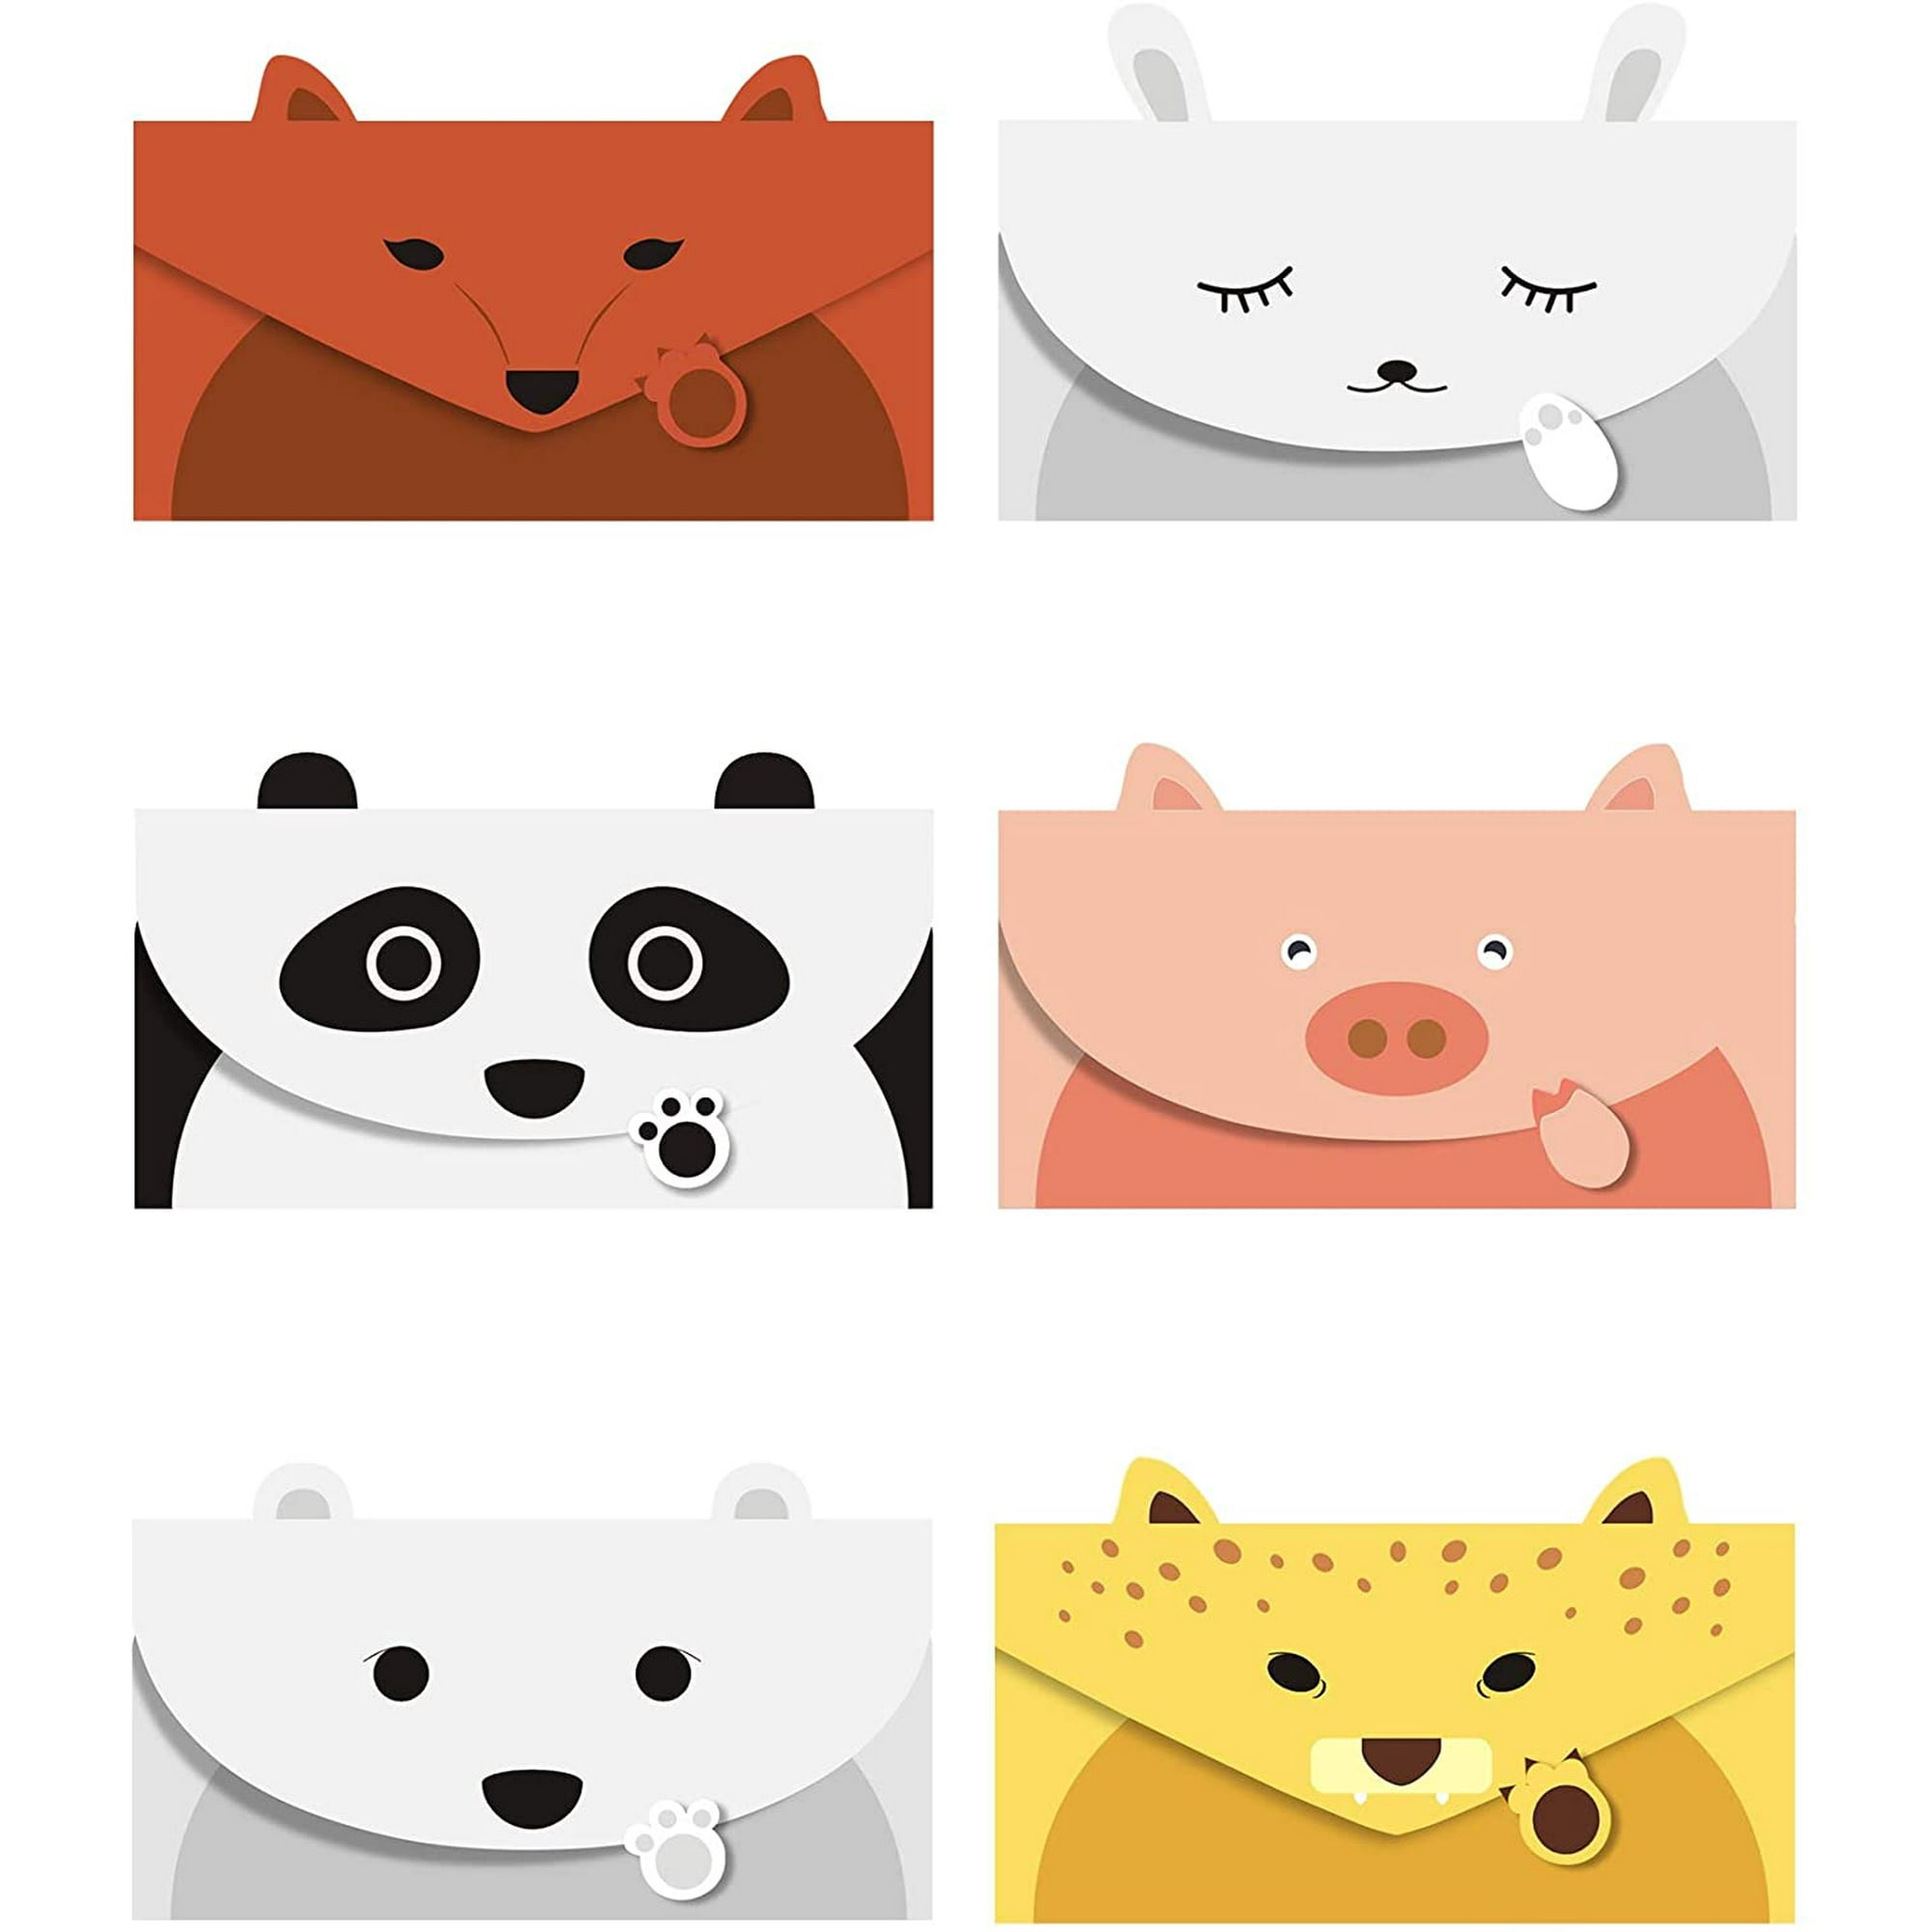 6 Pcs Cute Lovely Animal Cartoon Design Letter Writing Stationery Paper,  Greeting Card, Invitation Card, Thank You Card, Size 